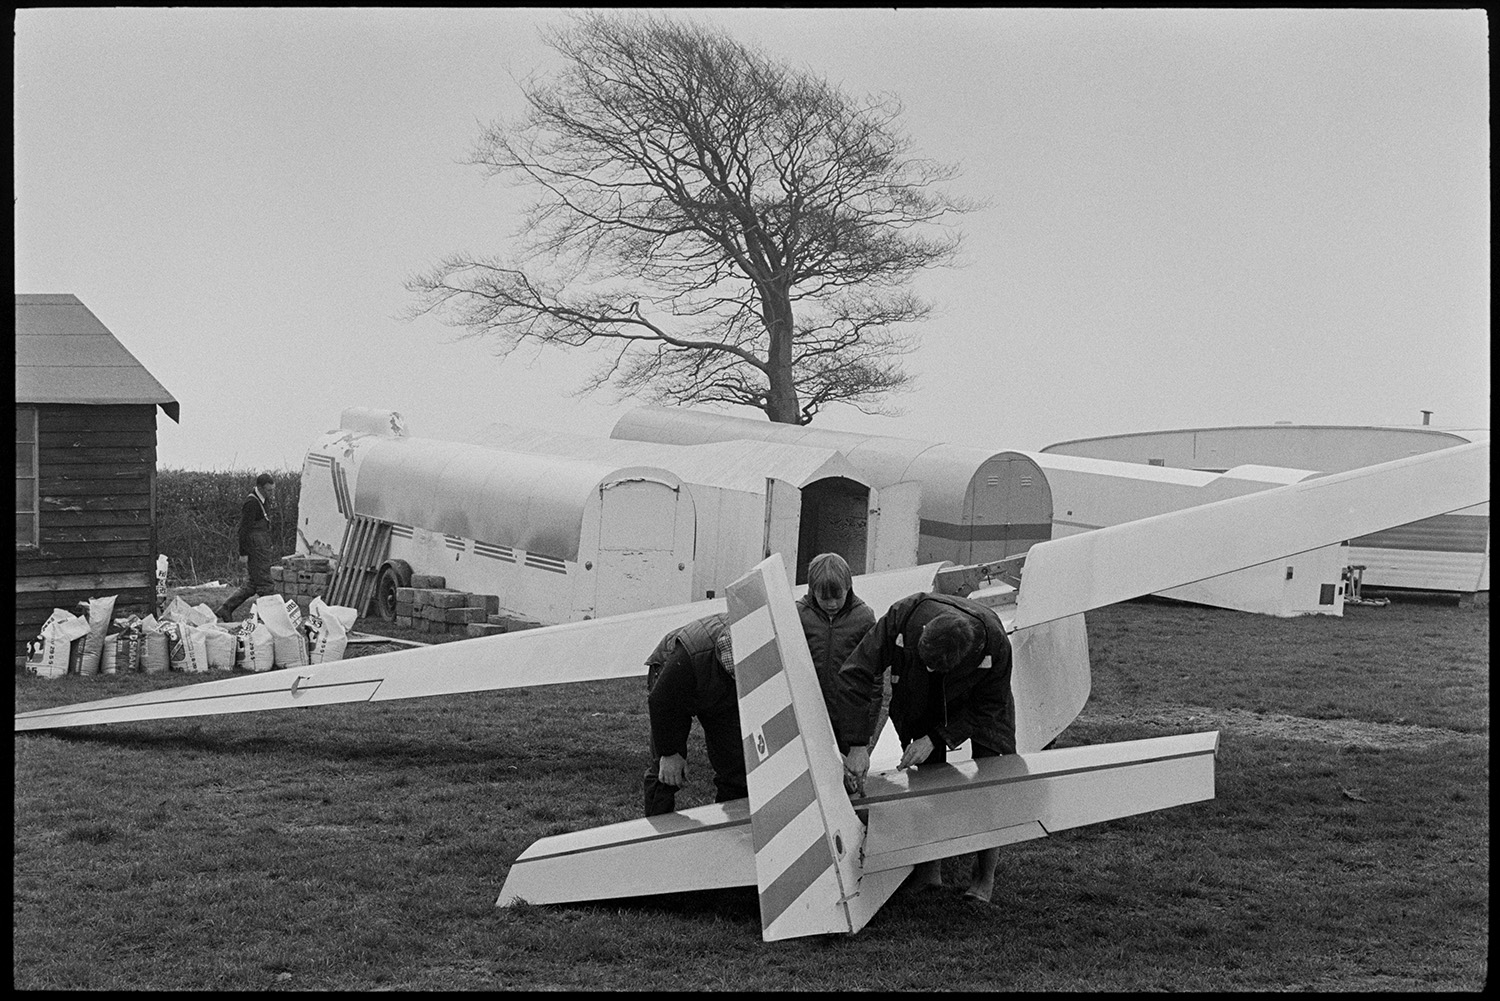 Glider at flying club. 
[Two men and a boy looking at a glider at a flying club at Eaglescott, Burrington. Trailers on wheels can be seen in the background.]